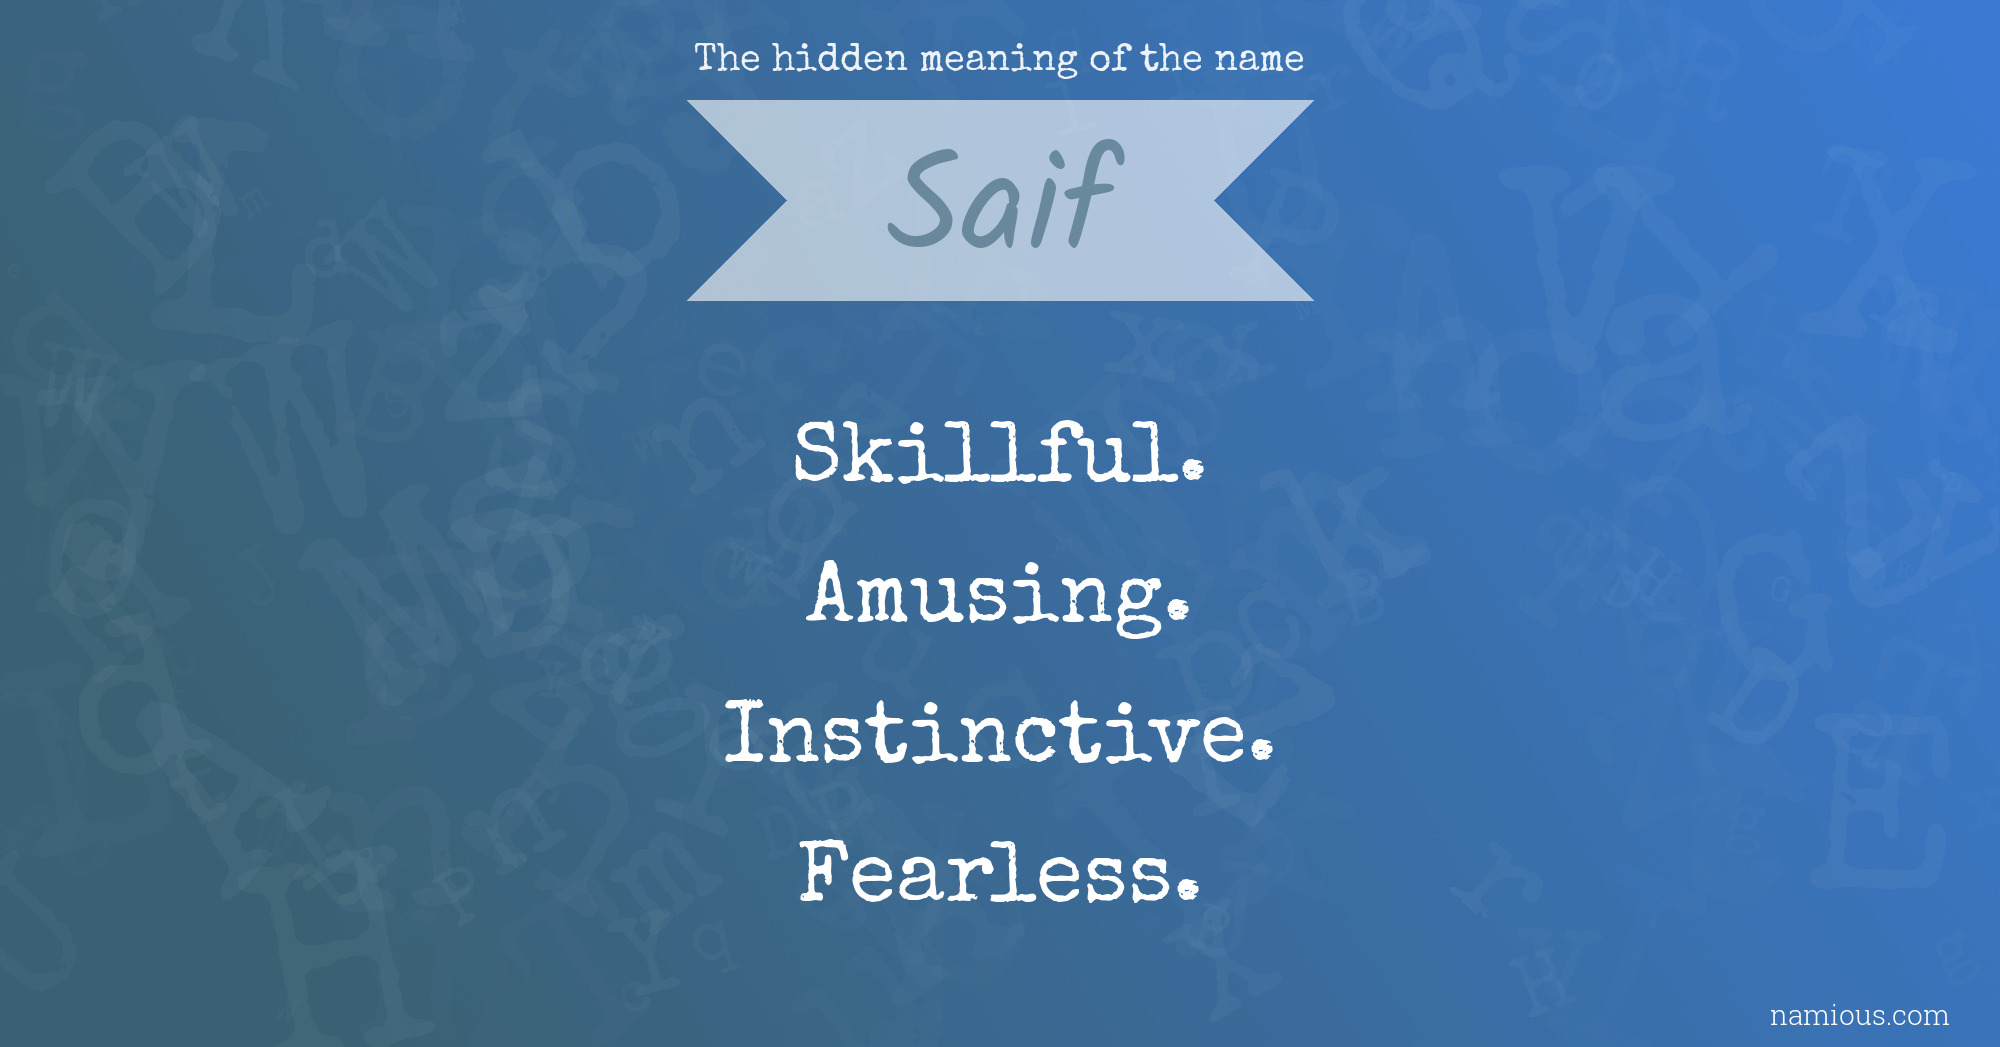 The hidden meaning of the name Saif